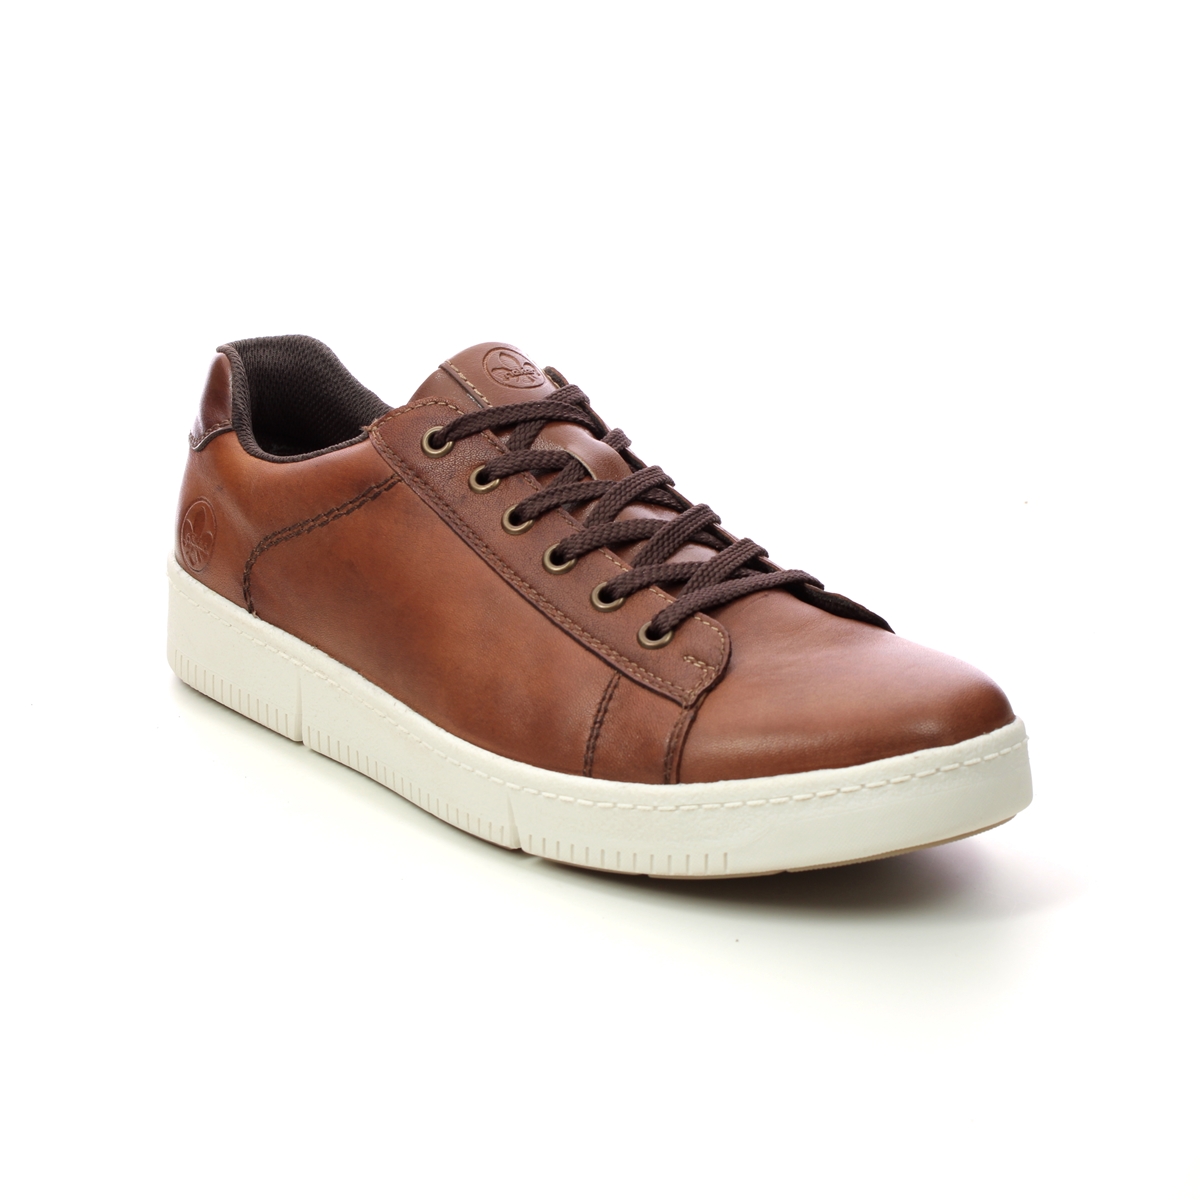 Rieker Seven Soft Tan Leather Mens Trainers B7120-24 In Size 43 In Plain Tan Leather